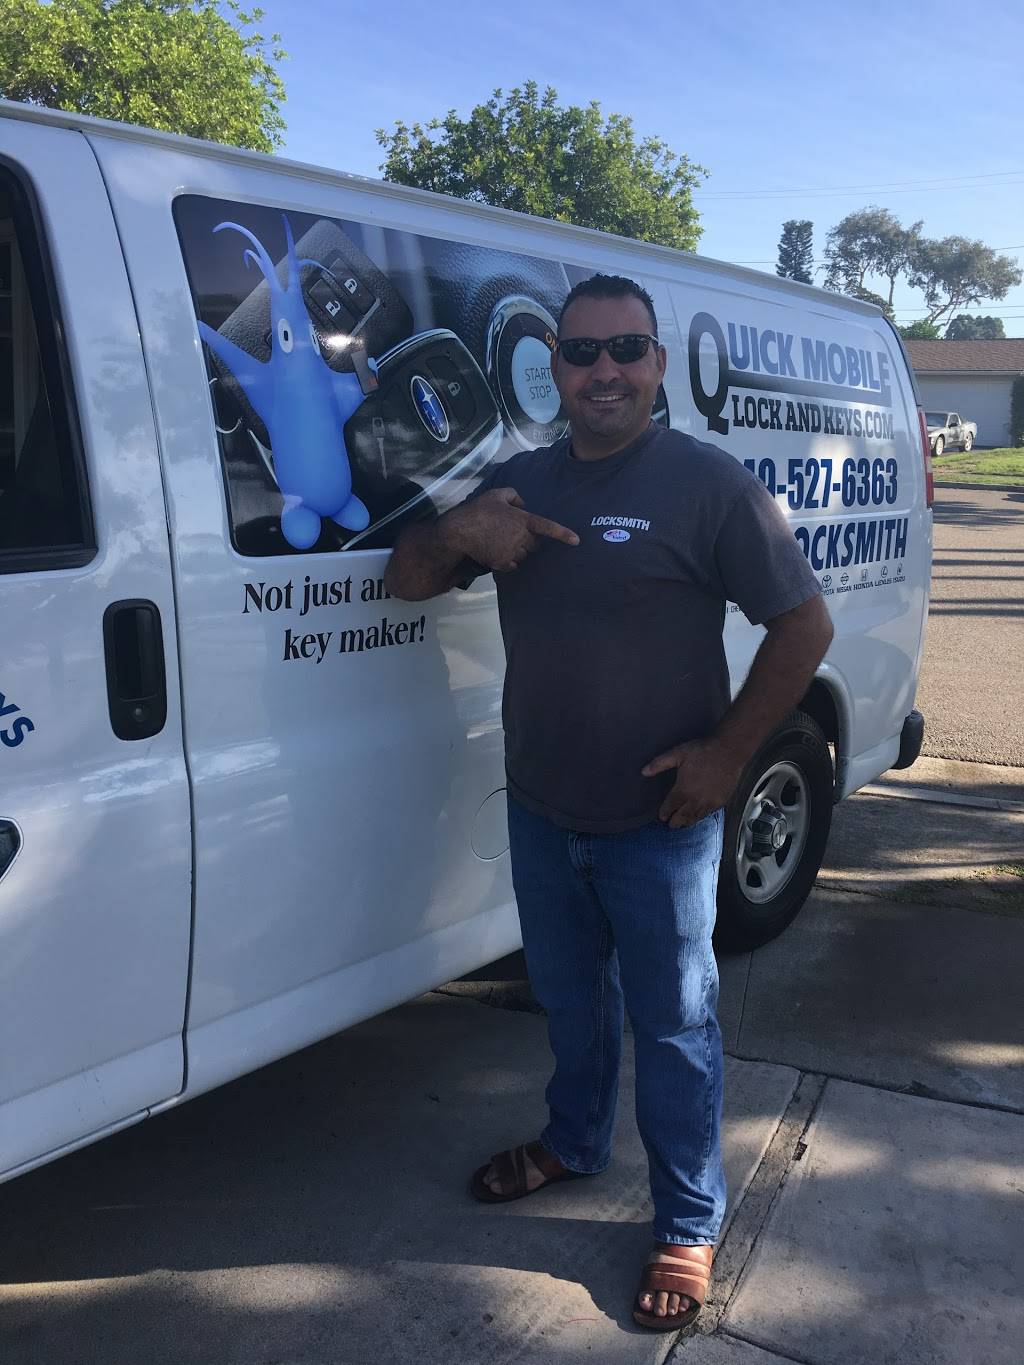 Quick Mobile Lock and Key | 13836 Red Hill Ave, Tustin, CA 92780 | Phone: (949) 590-0899